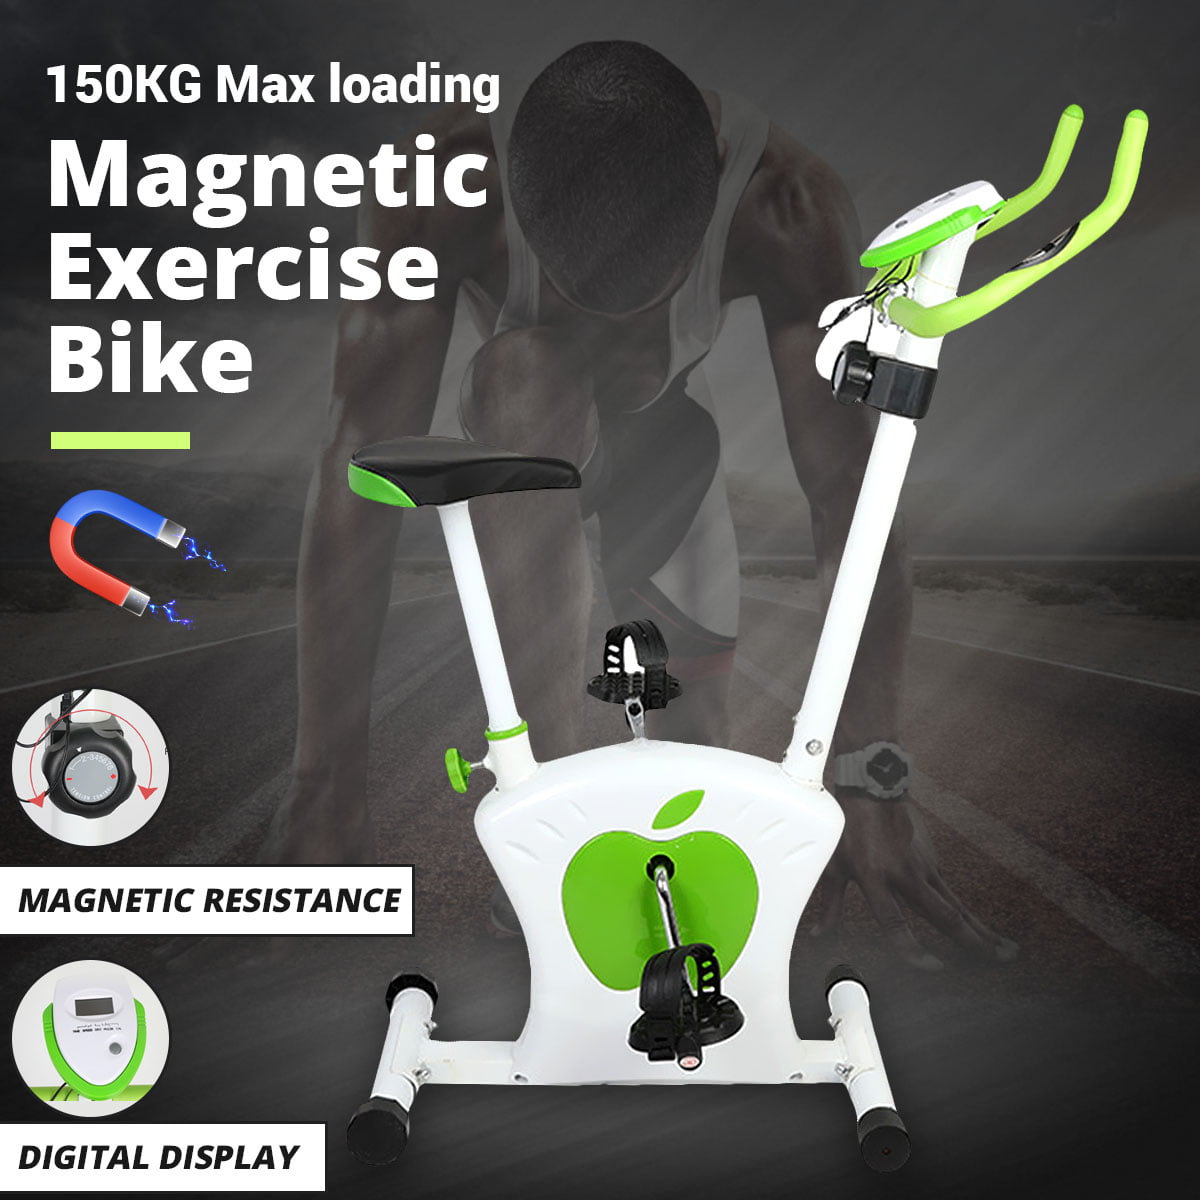 exercise bike max weight 150kg